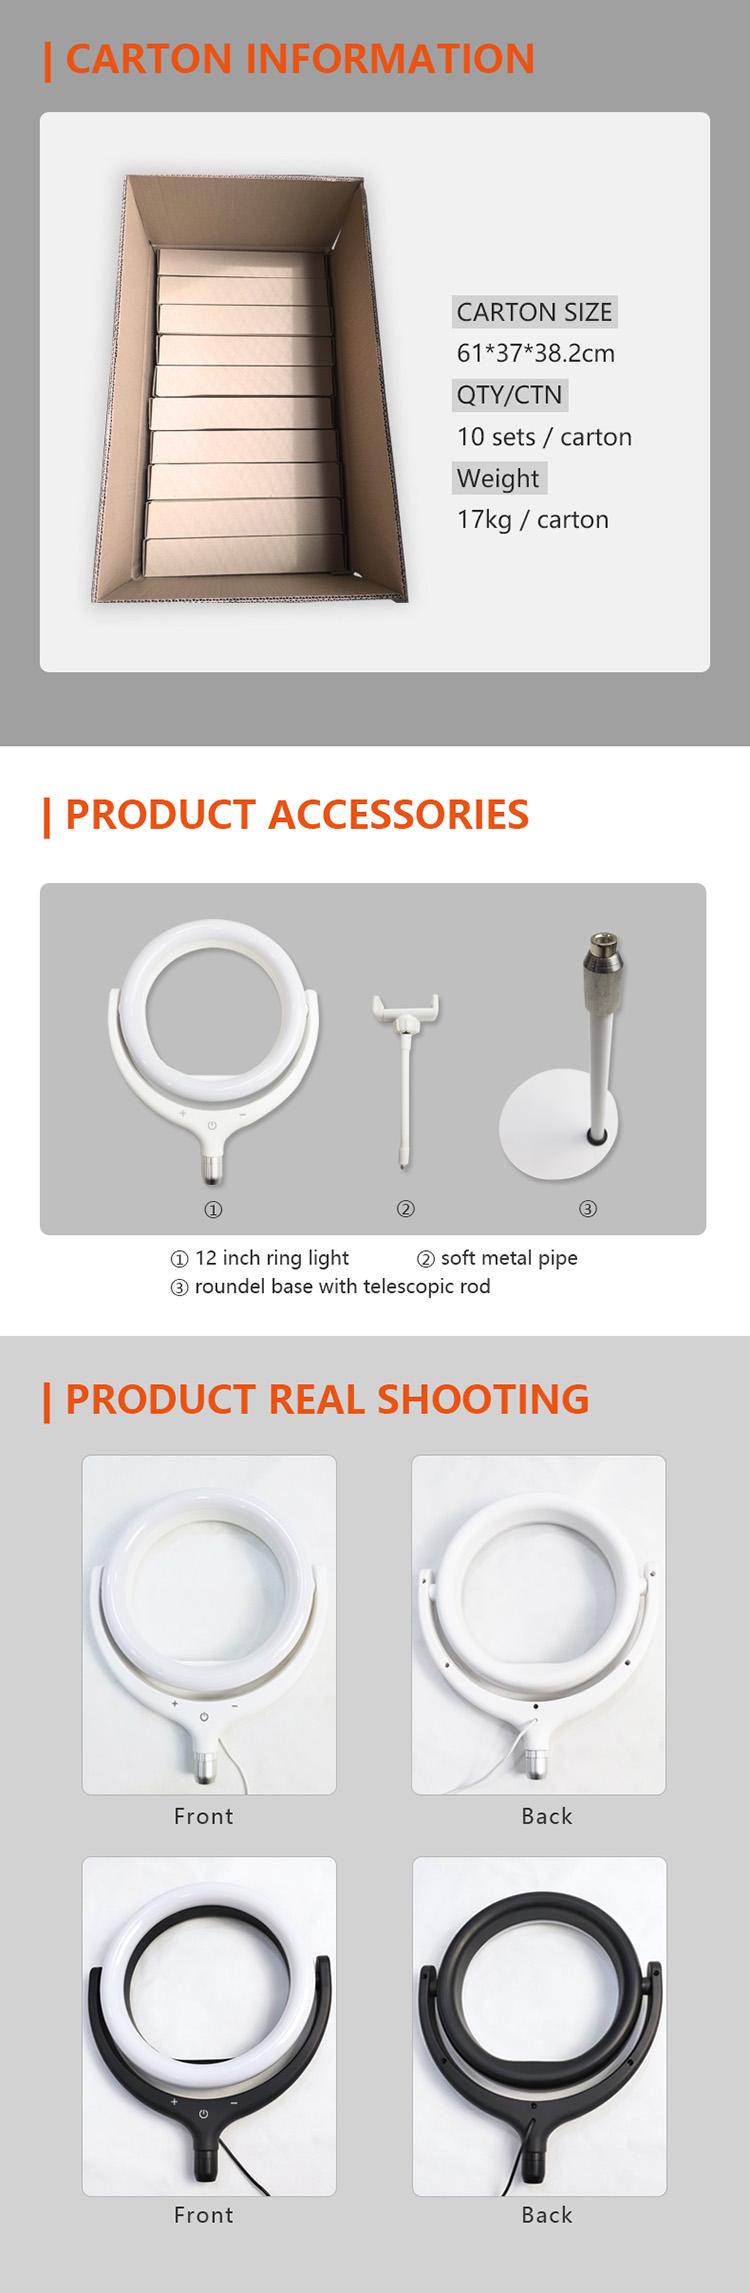 Beauty Flash Light Phone Camera Photography 12 inch LED Ring Light with 40cm Tripod